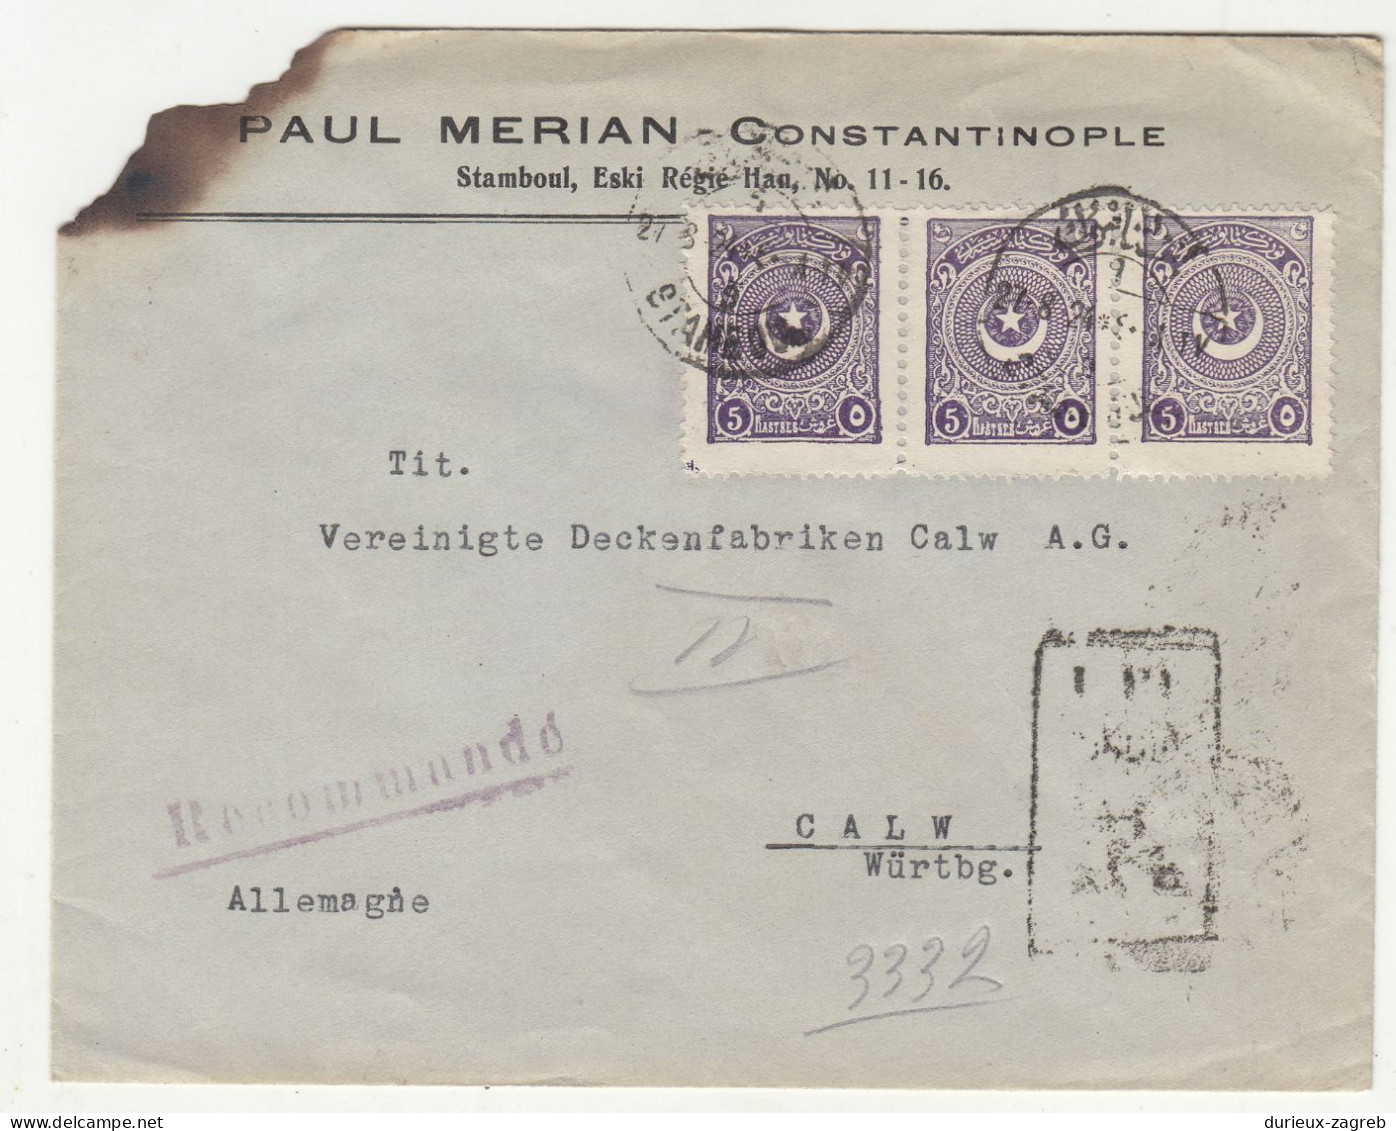 Paul Merian, Constantinople Company Letter Cover Posted Registered 1924 To Germany B230801 - Storia Postale